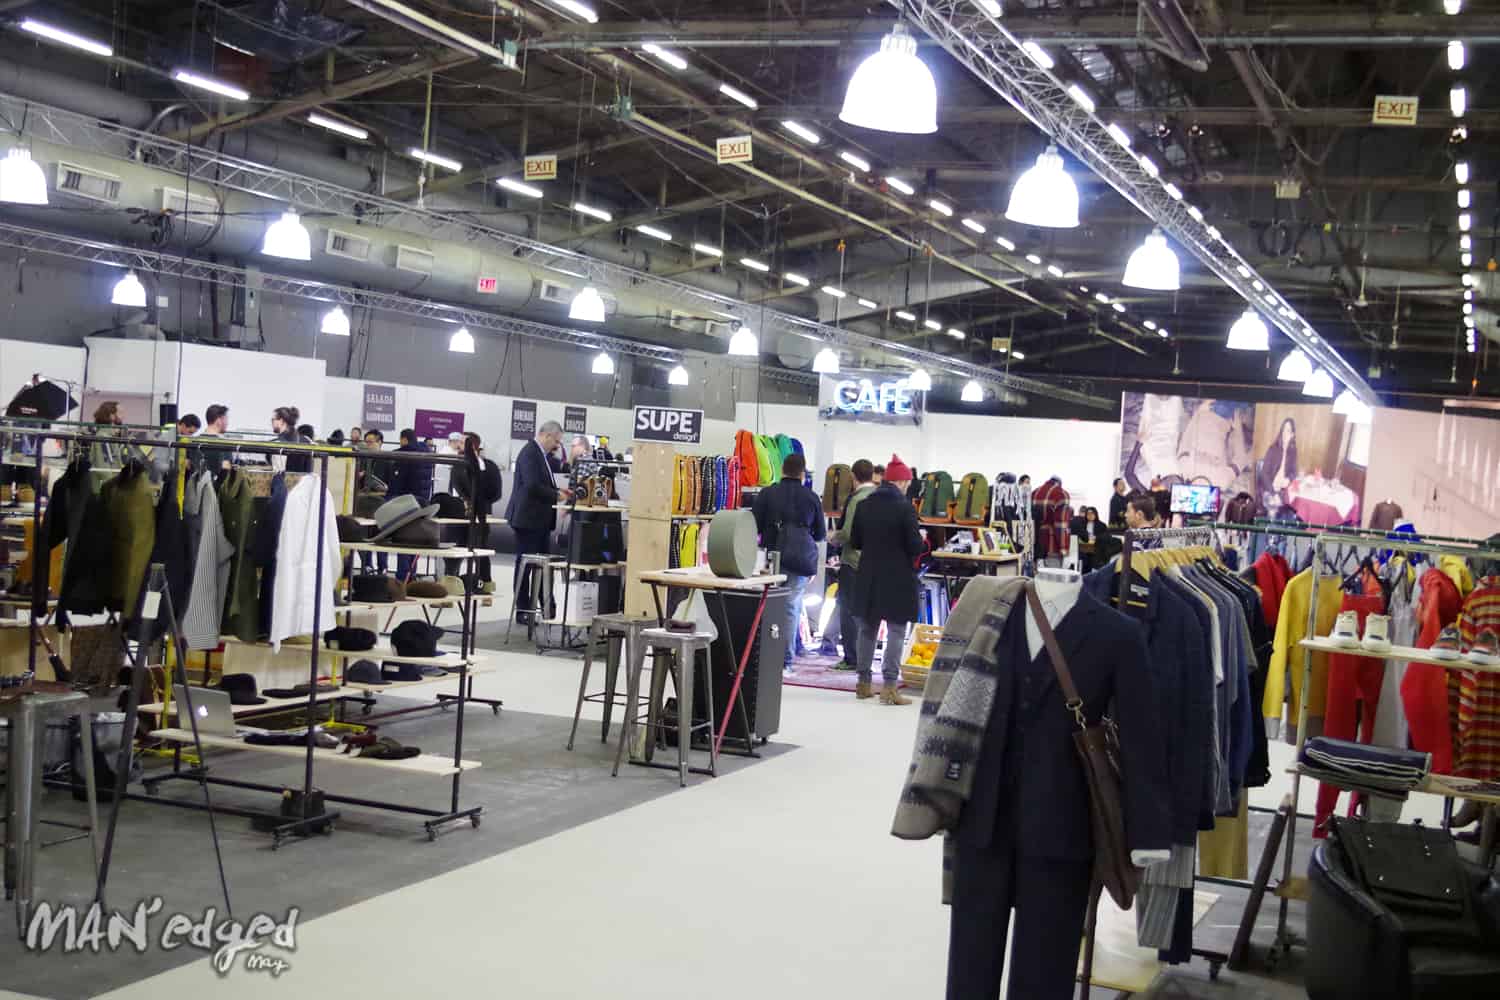 Freedom Hall section at Liberty Fairs showcasing various menswear brands.